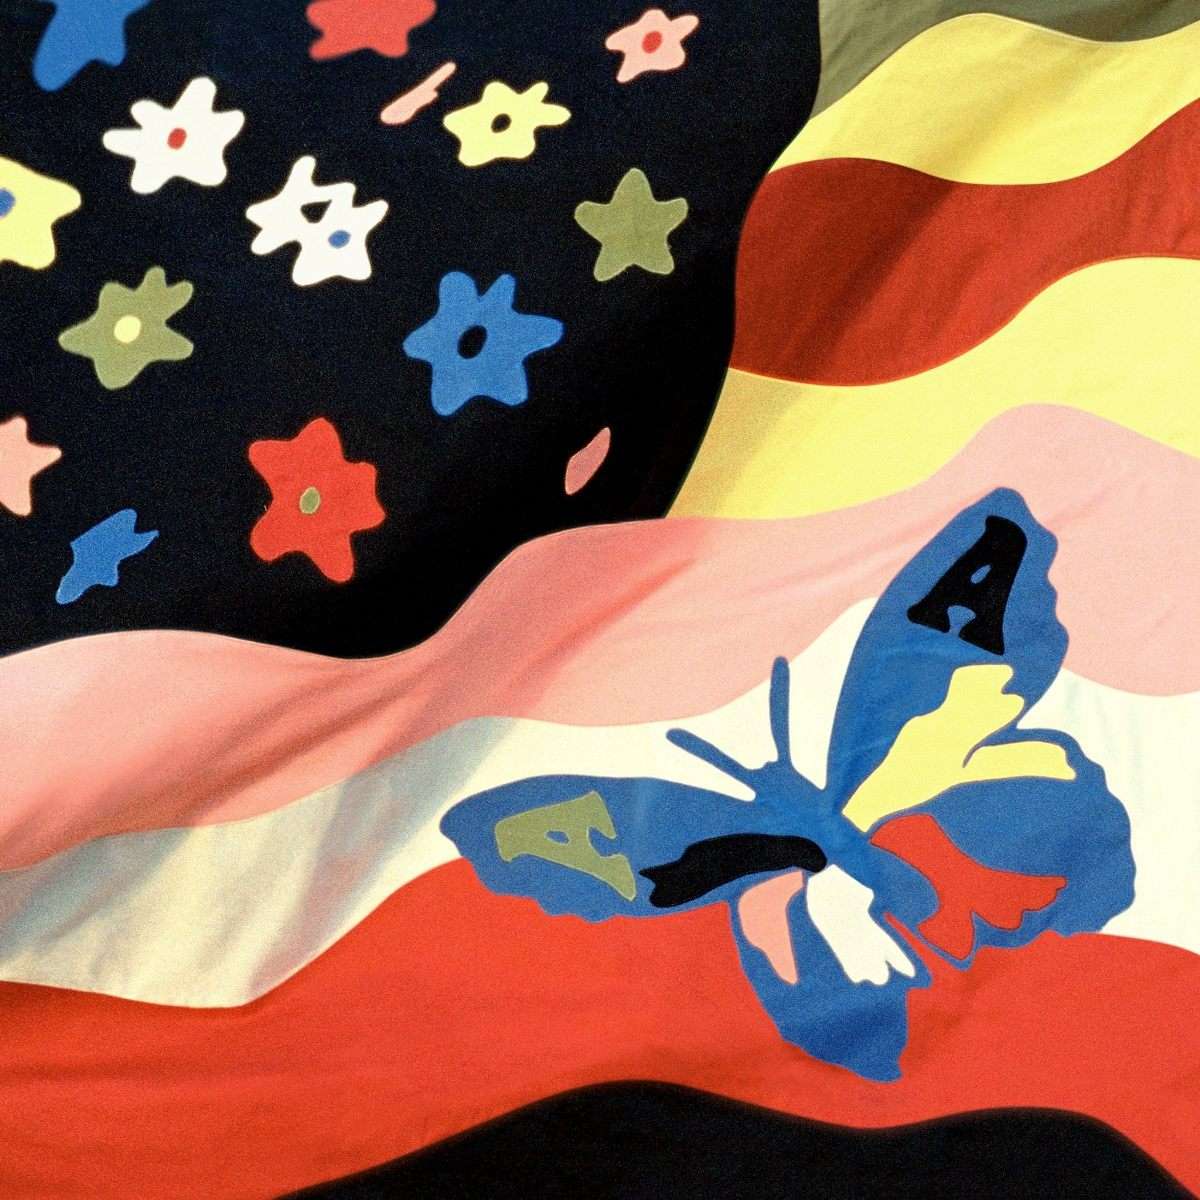 The Avalanches "Wildflower" LP